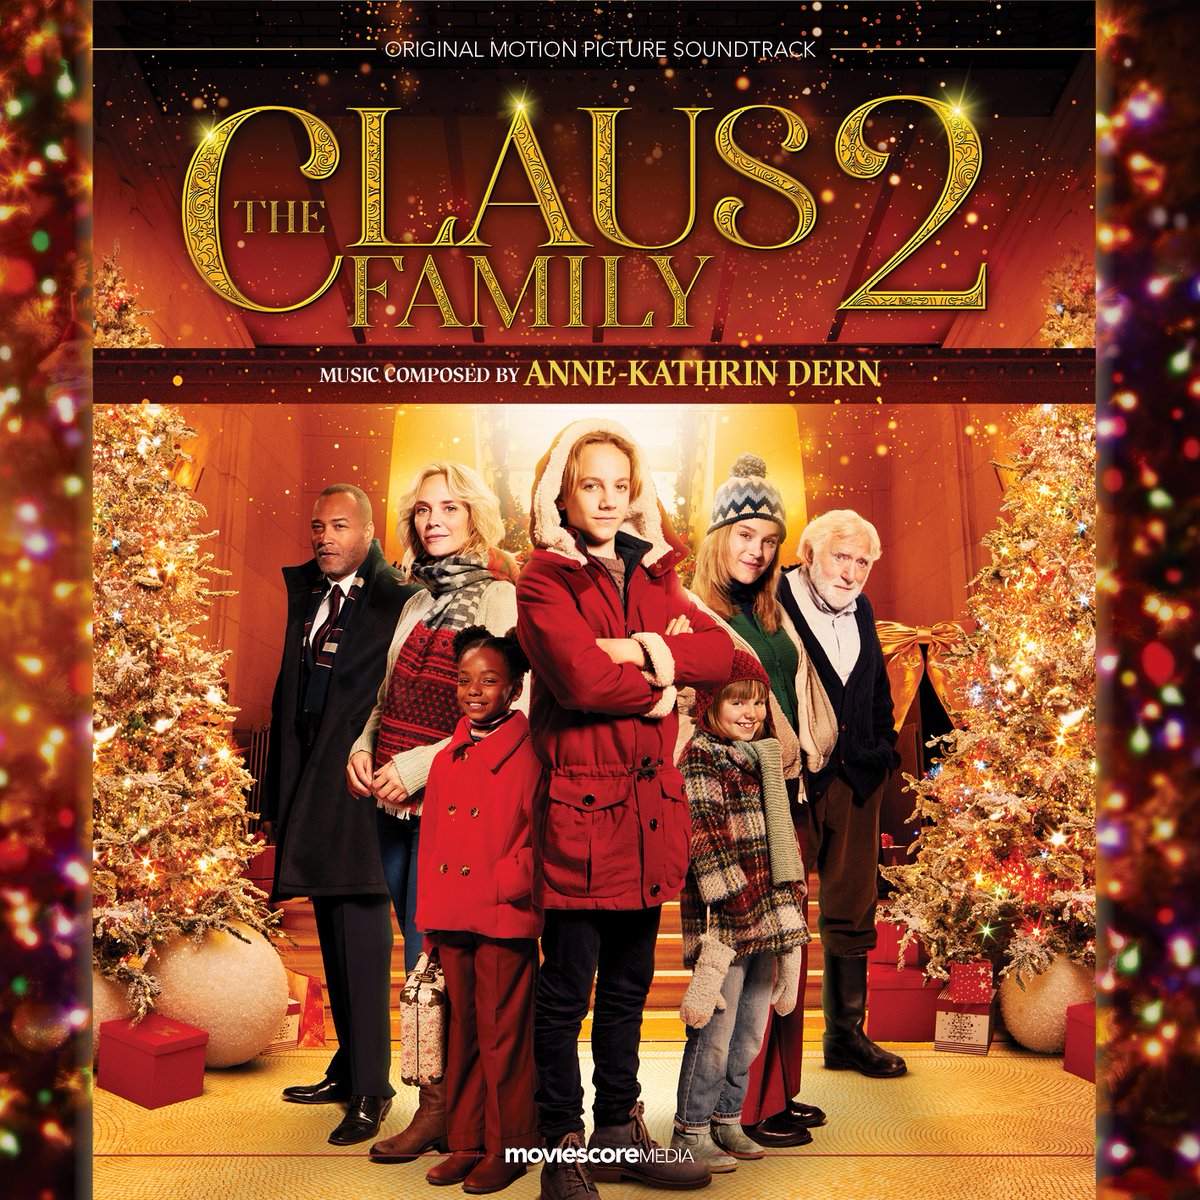 Film Music Site - The Claus Family 2 Soundtrack (Anne-Kathrin Dern) -  MovieScore Media (2021) - (Digital)